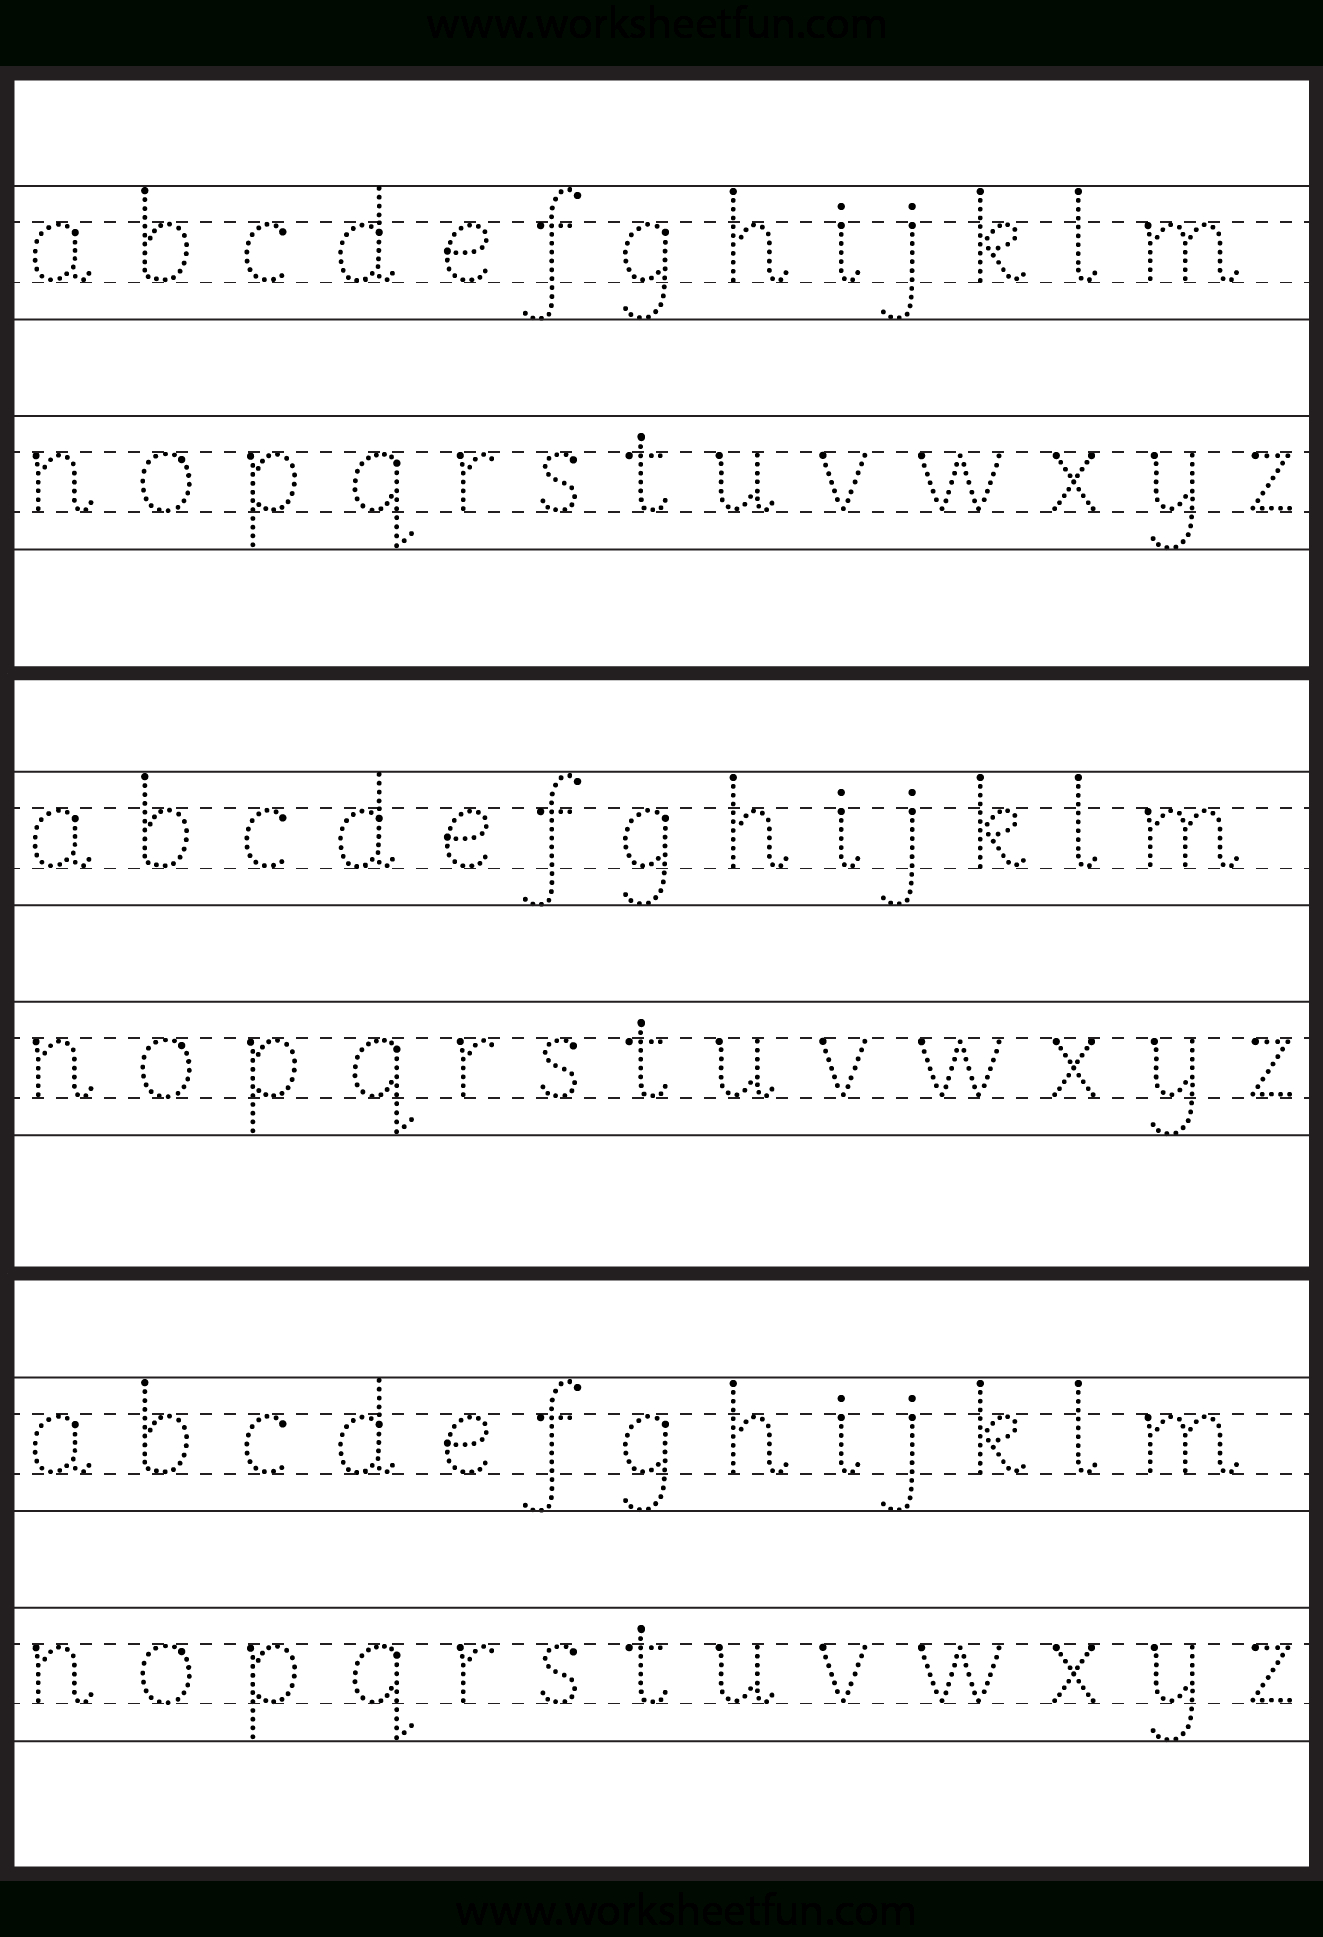 Lowercase/ Small Letter Tracing Worksheet | Letter Tracing inside Letter Tracing Worksheets Lower Case